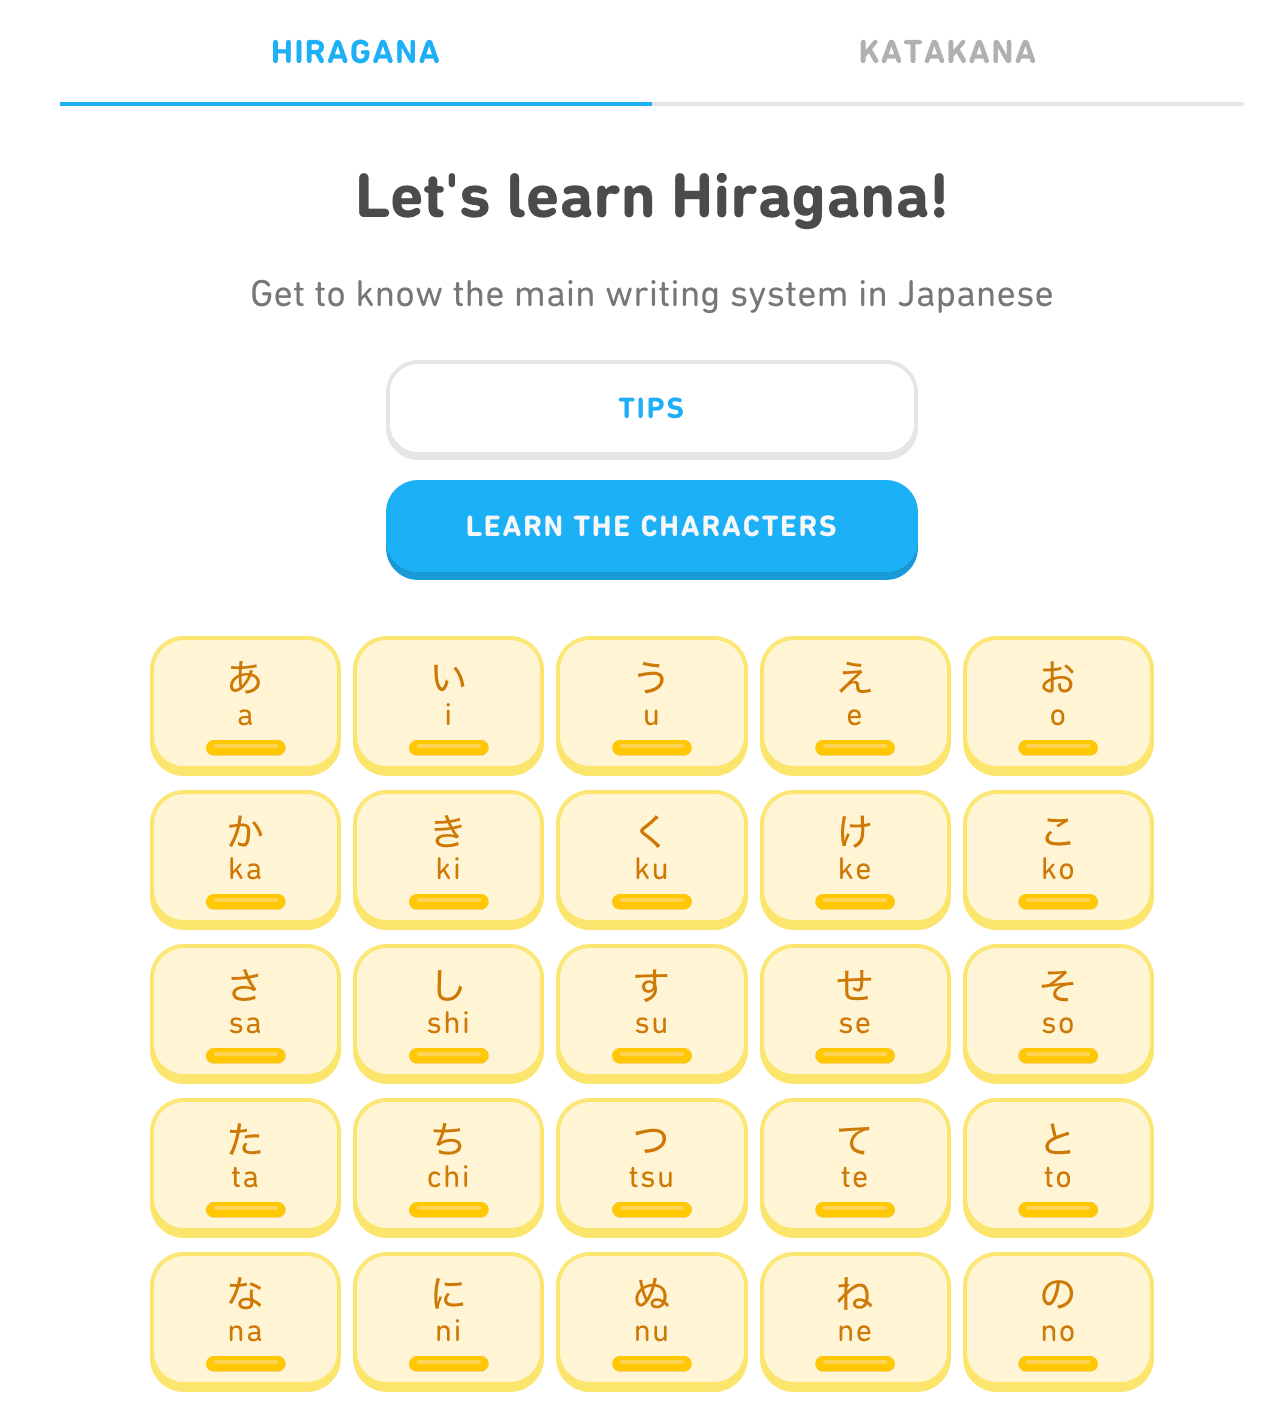 Duolingo is great for learning the alphabet